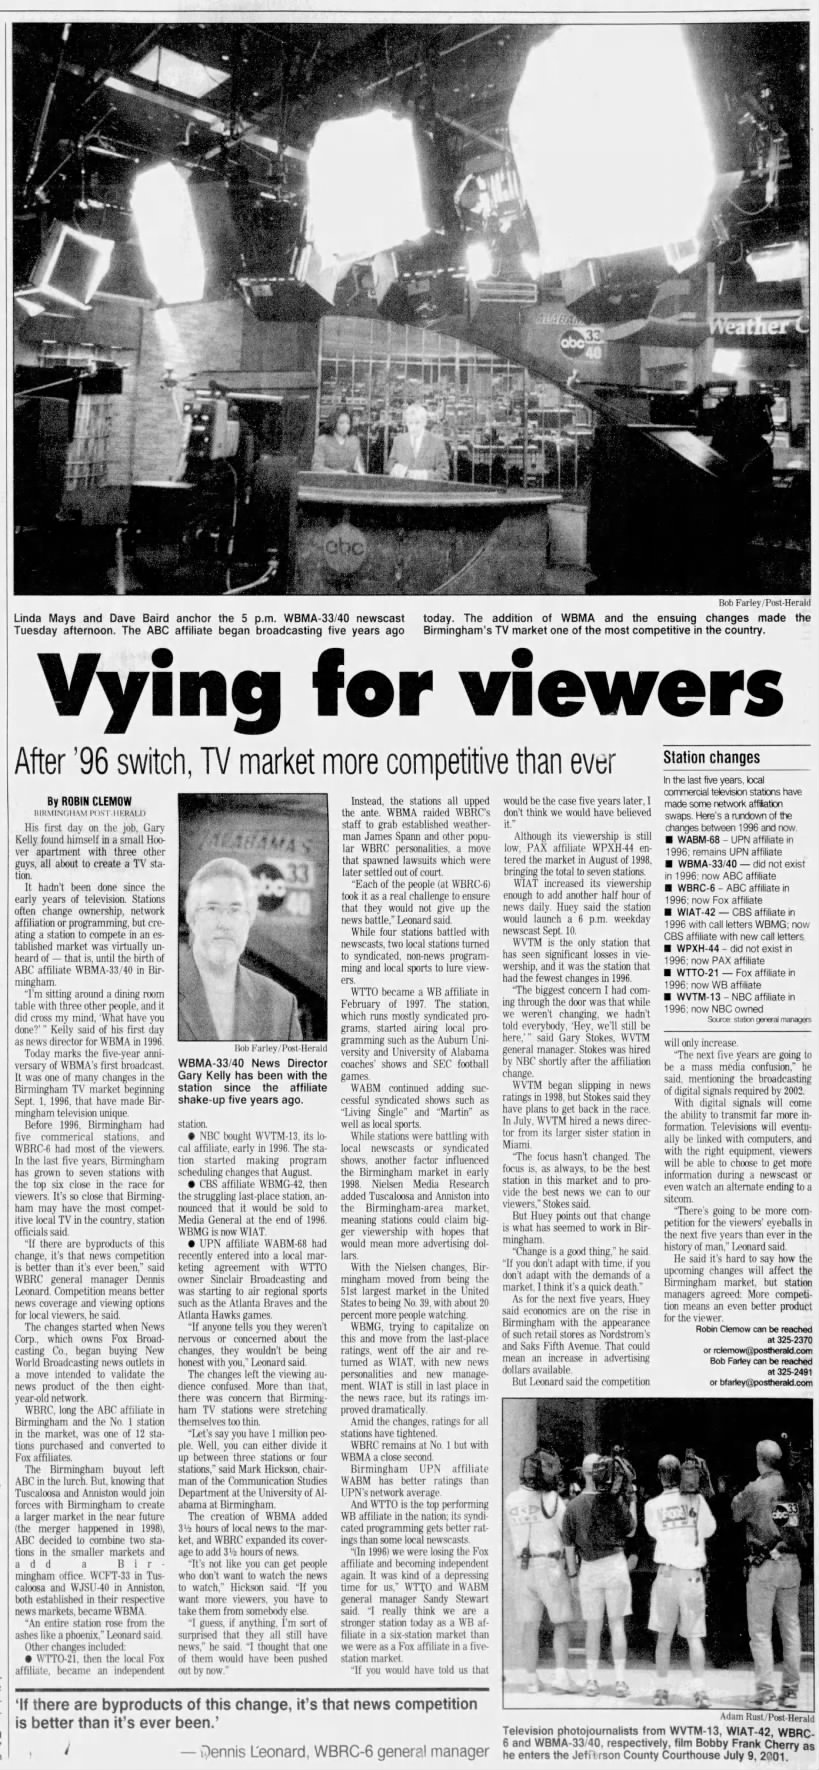 Vying for viewers: After '96 switch, TV market more competitive than ever